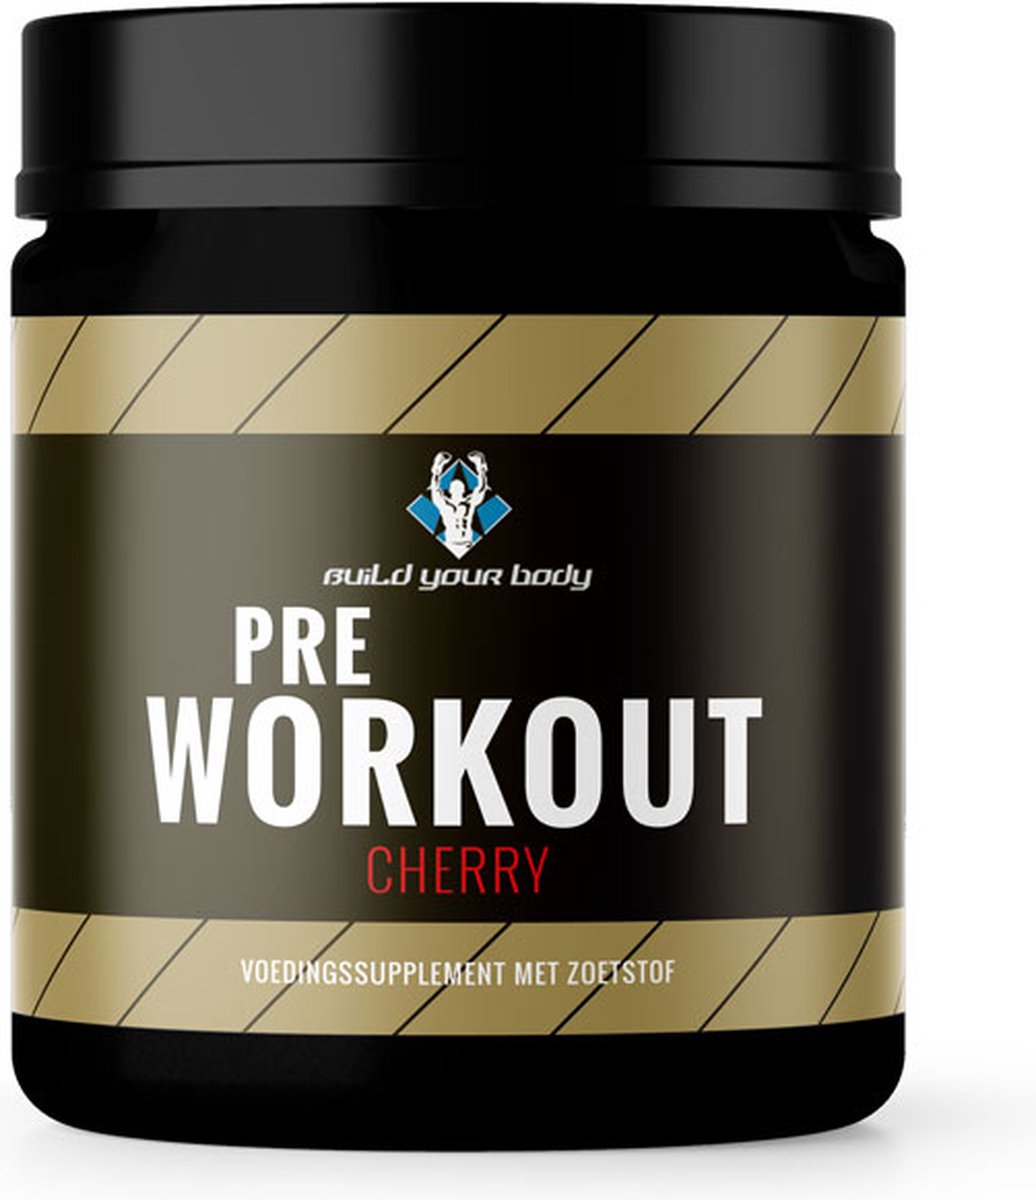 pre-workout cherry Build your Body